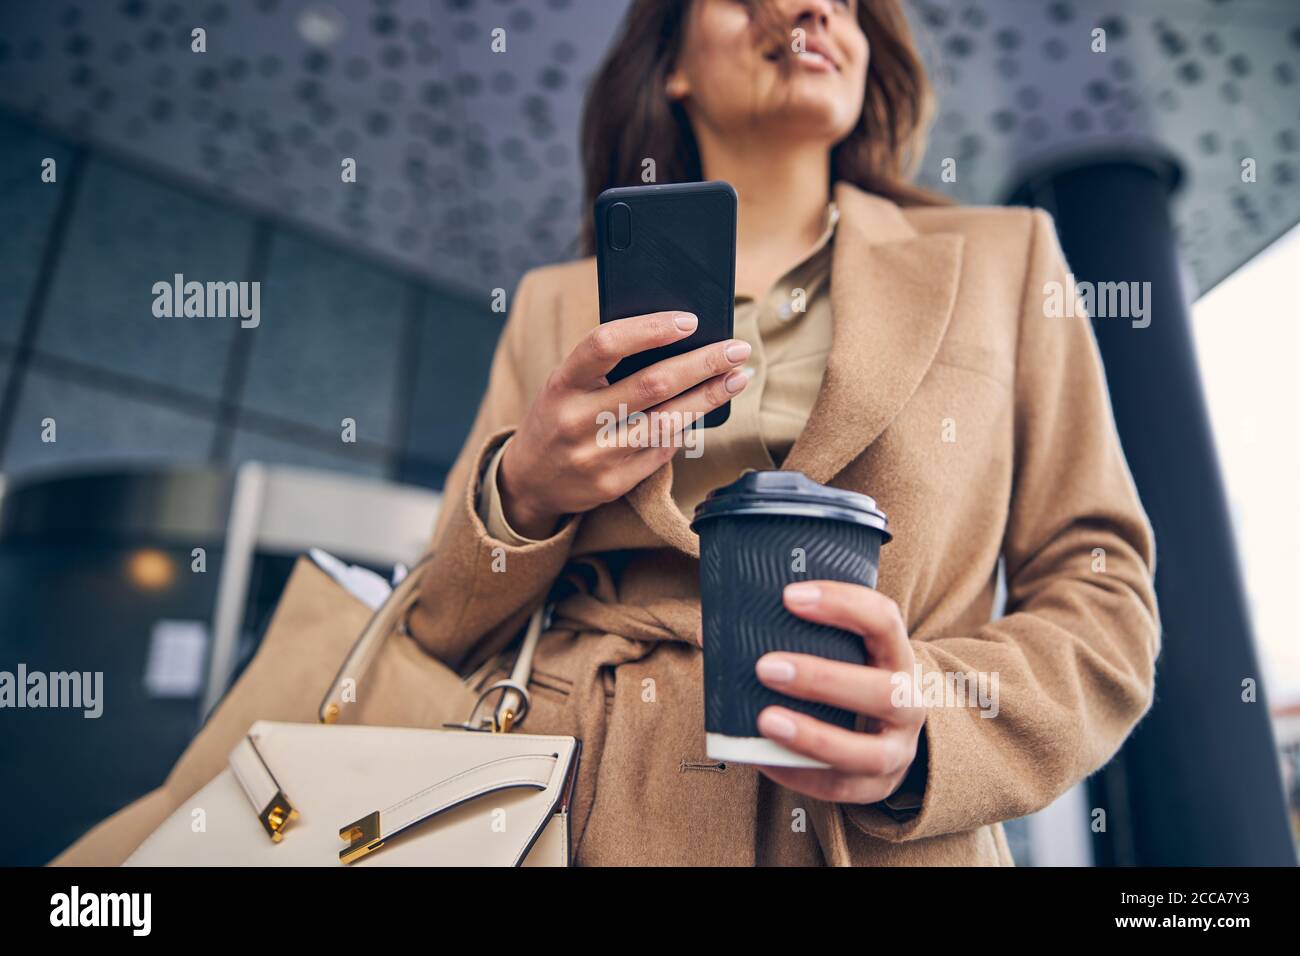 Pleased woman with a cellphone gazing into the distance Stock Photo